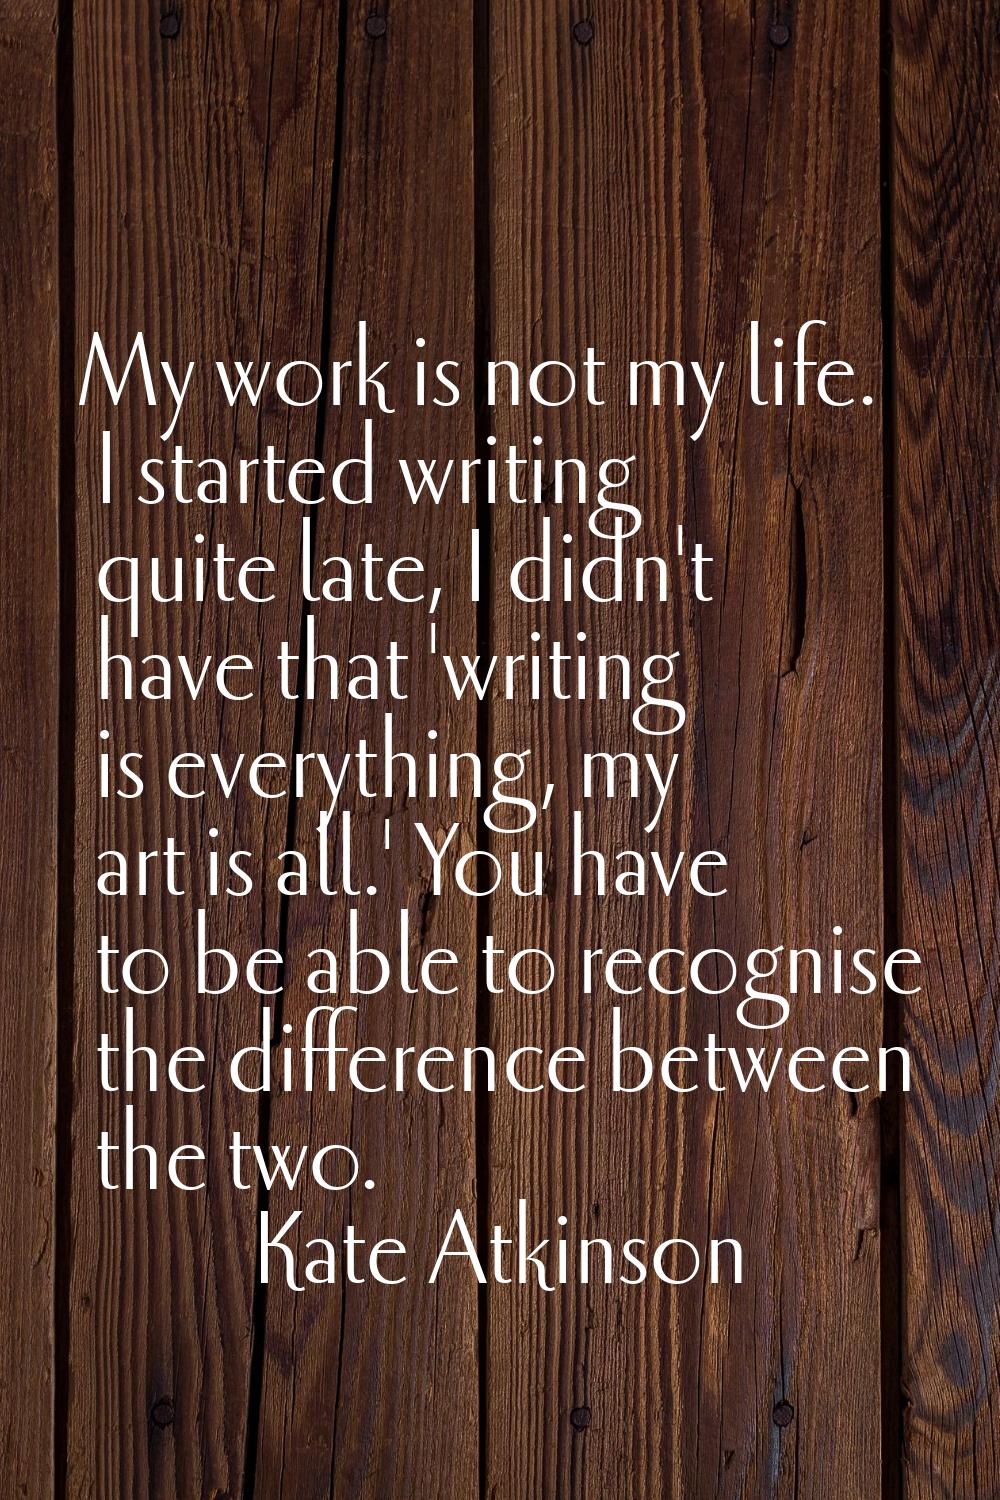 My work is not my life. I started writing quite late, I didn't have that 'writing is everything, my